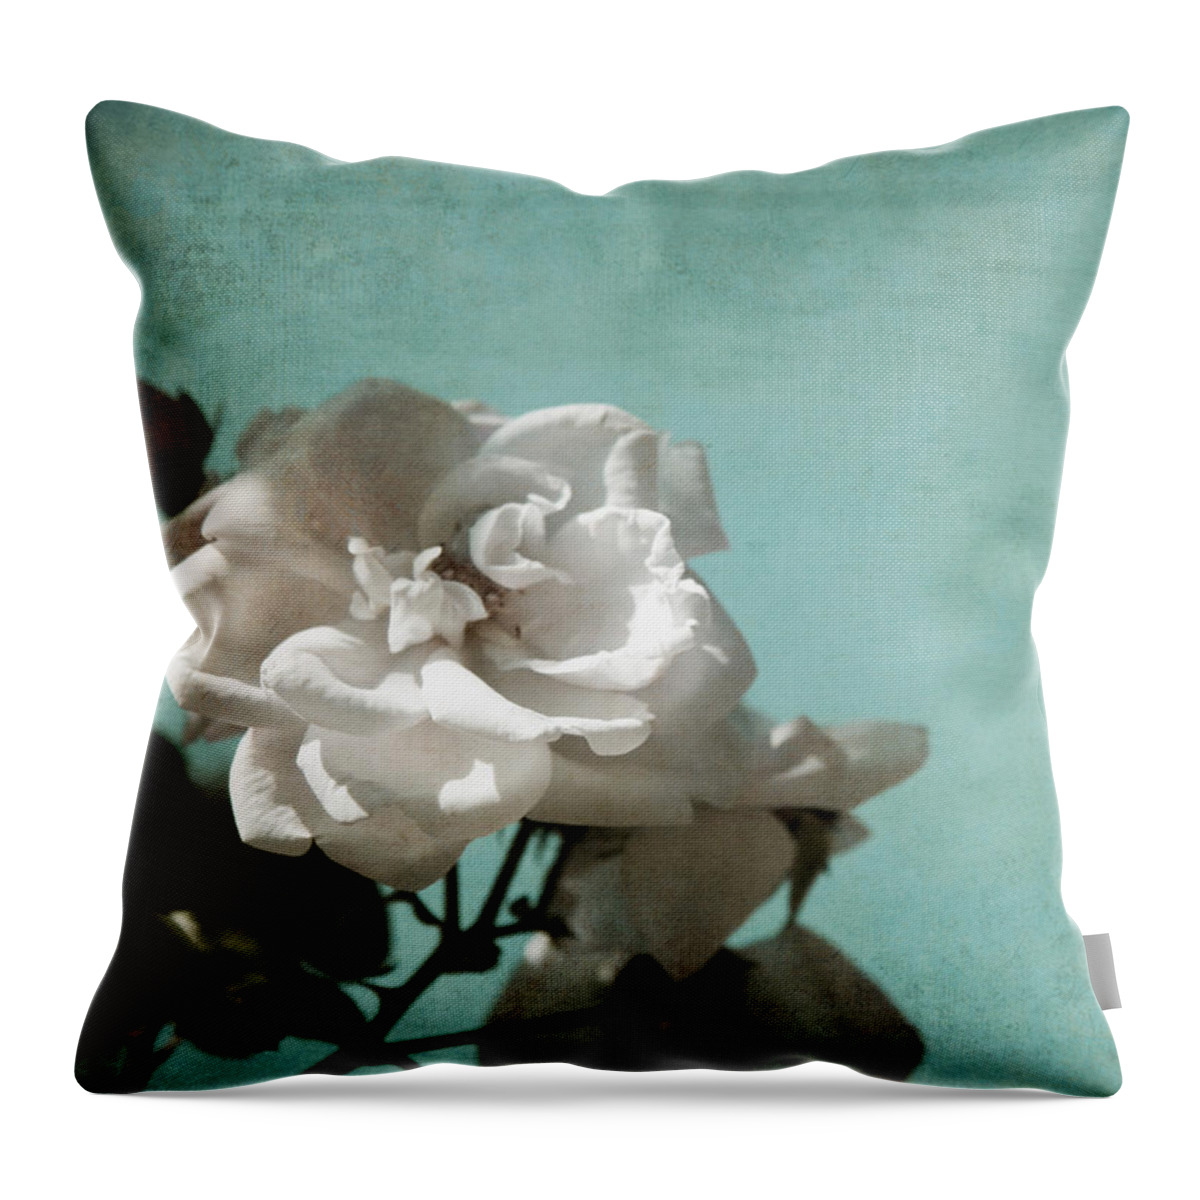 Floral Throw Pillow featuring the photograph Vintage Inspired White Roses on Aqua Blue Green - by Brooke T Ryan